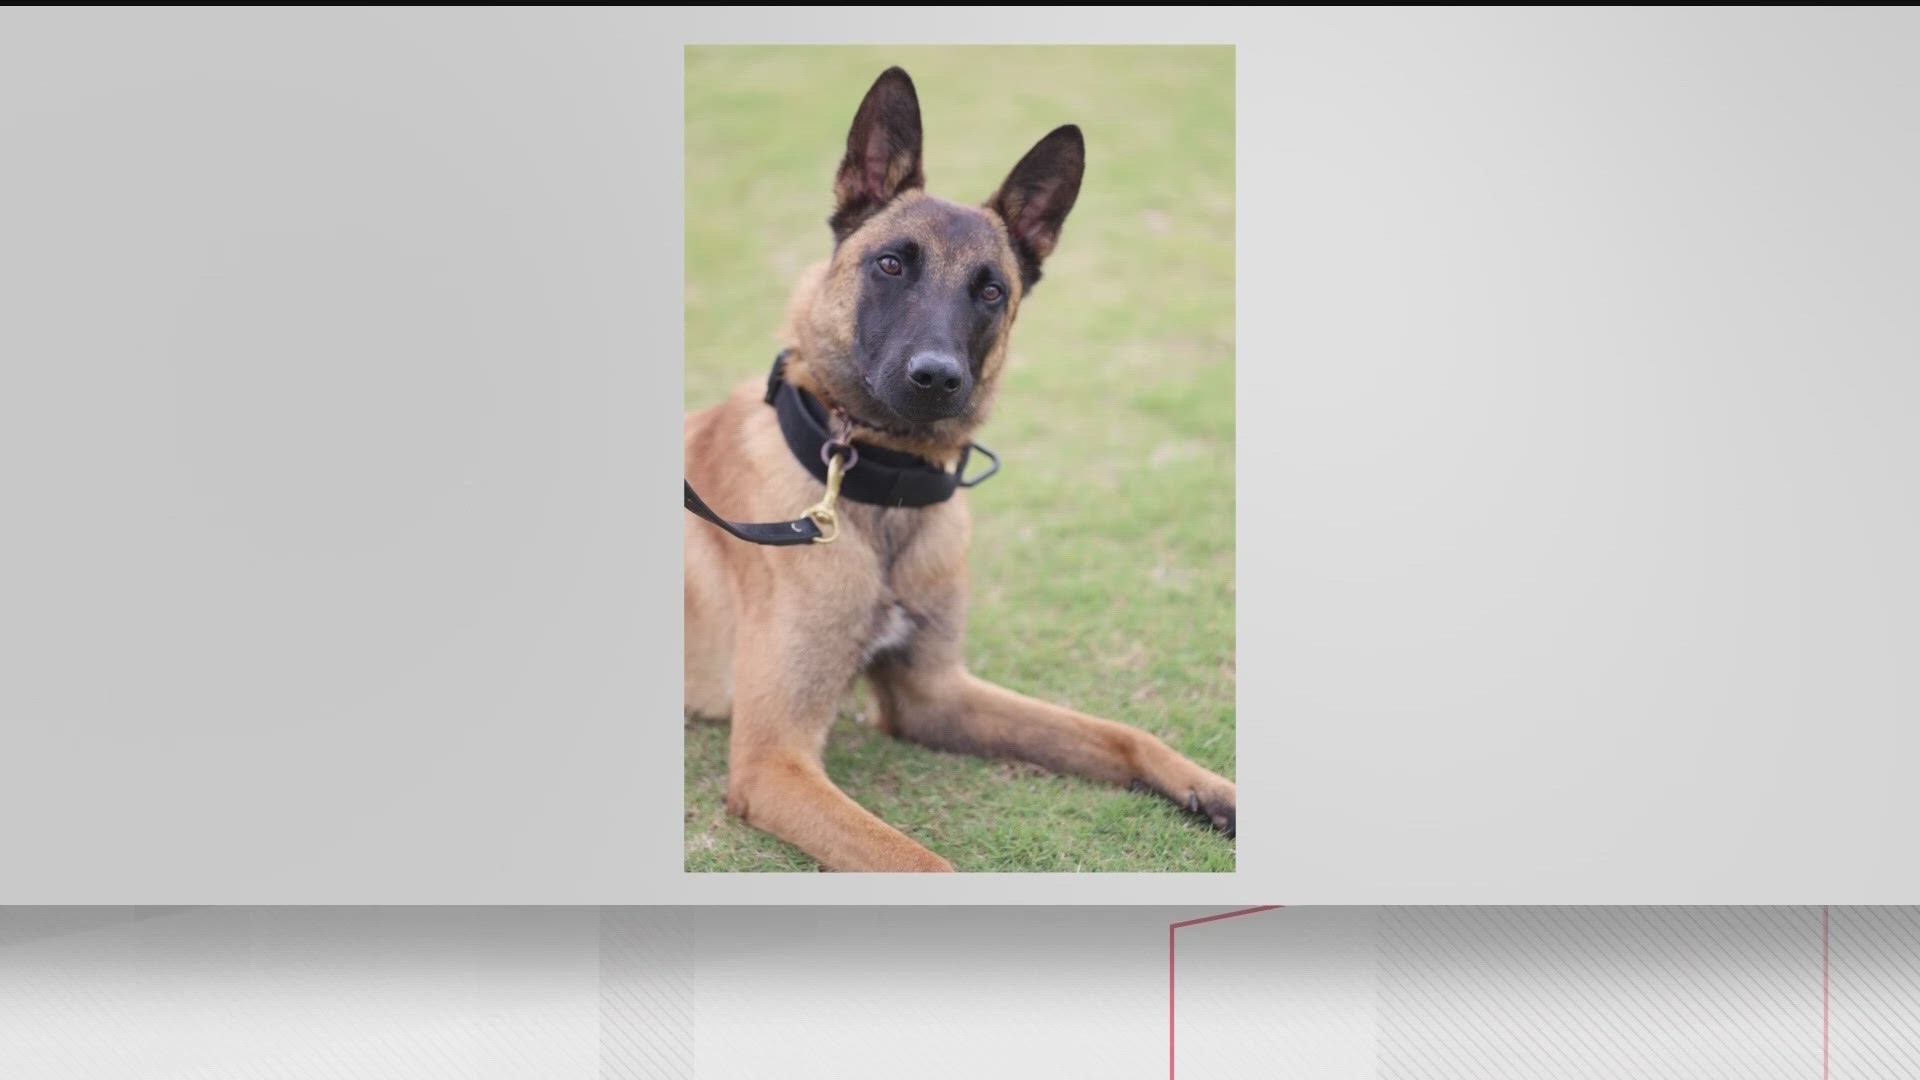 The five-year-old service animal, K-9 Chase, was found unresponsive in the patrol vehicle by his handler officer, K-9 Officer Neill.